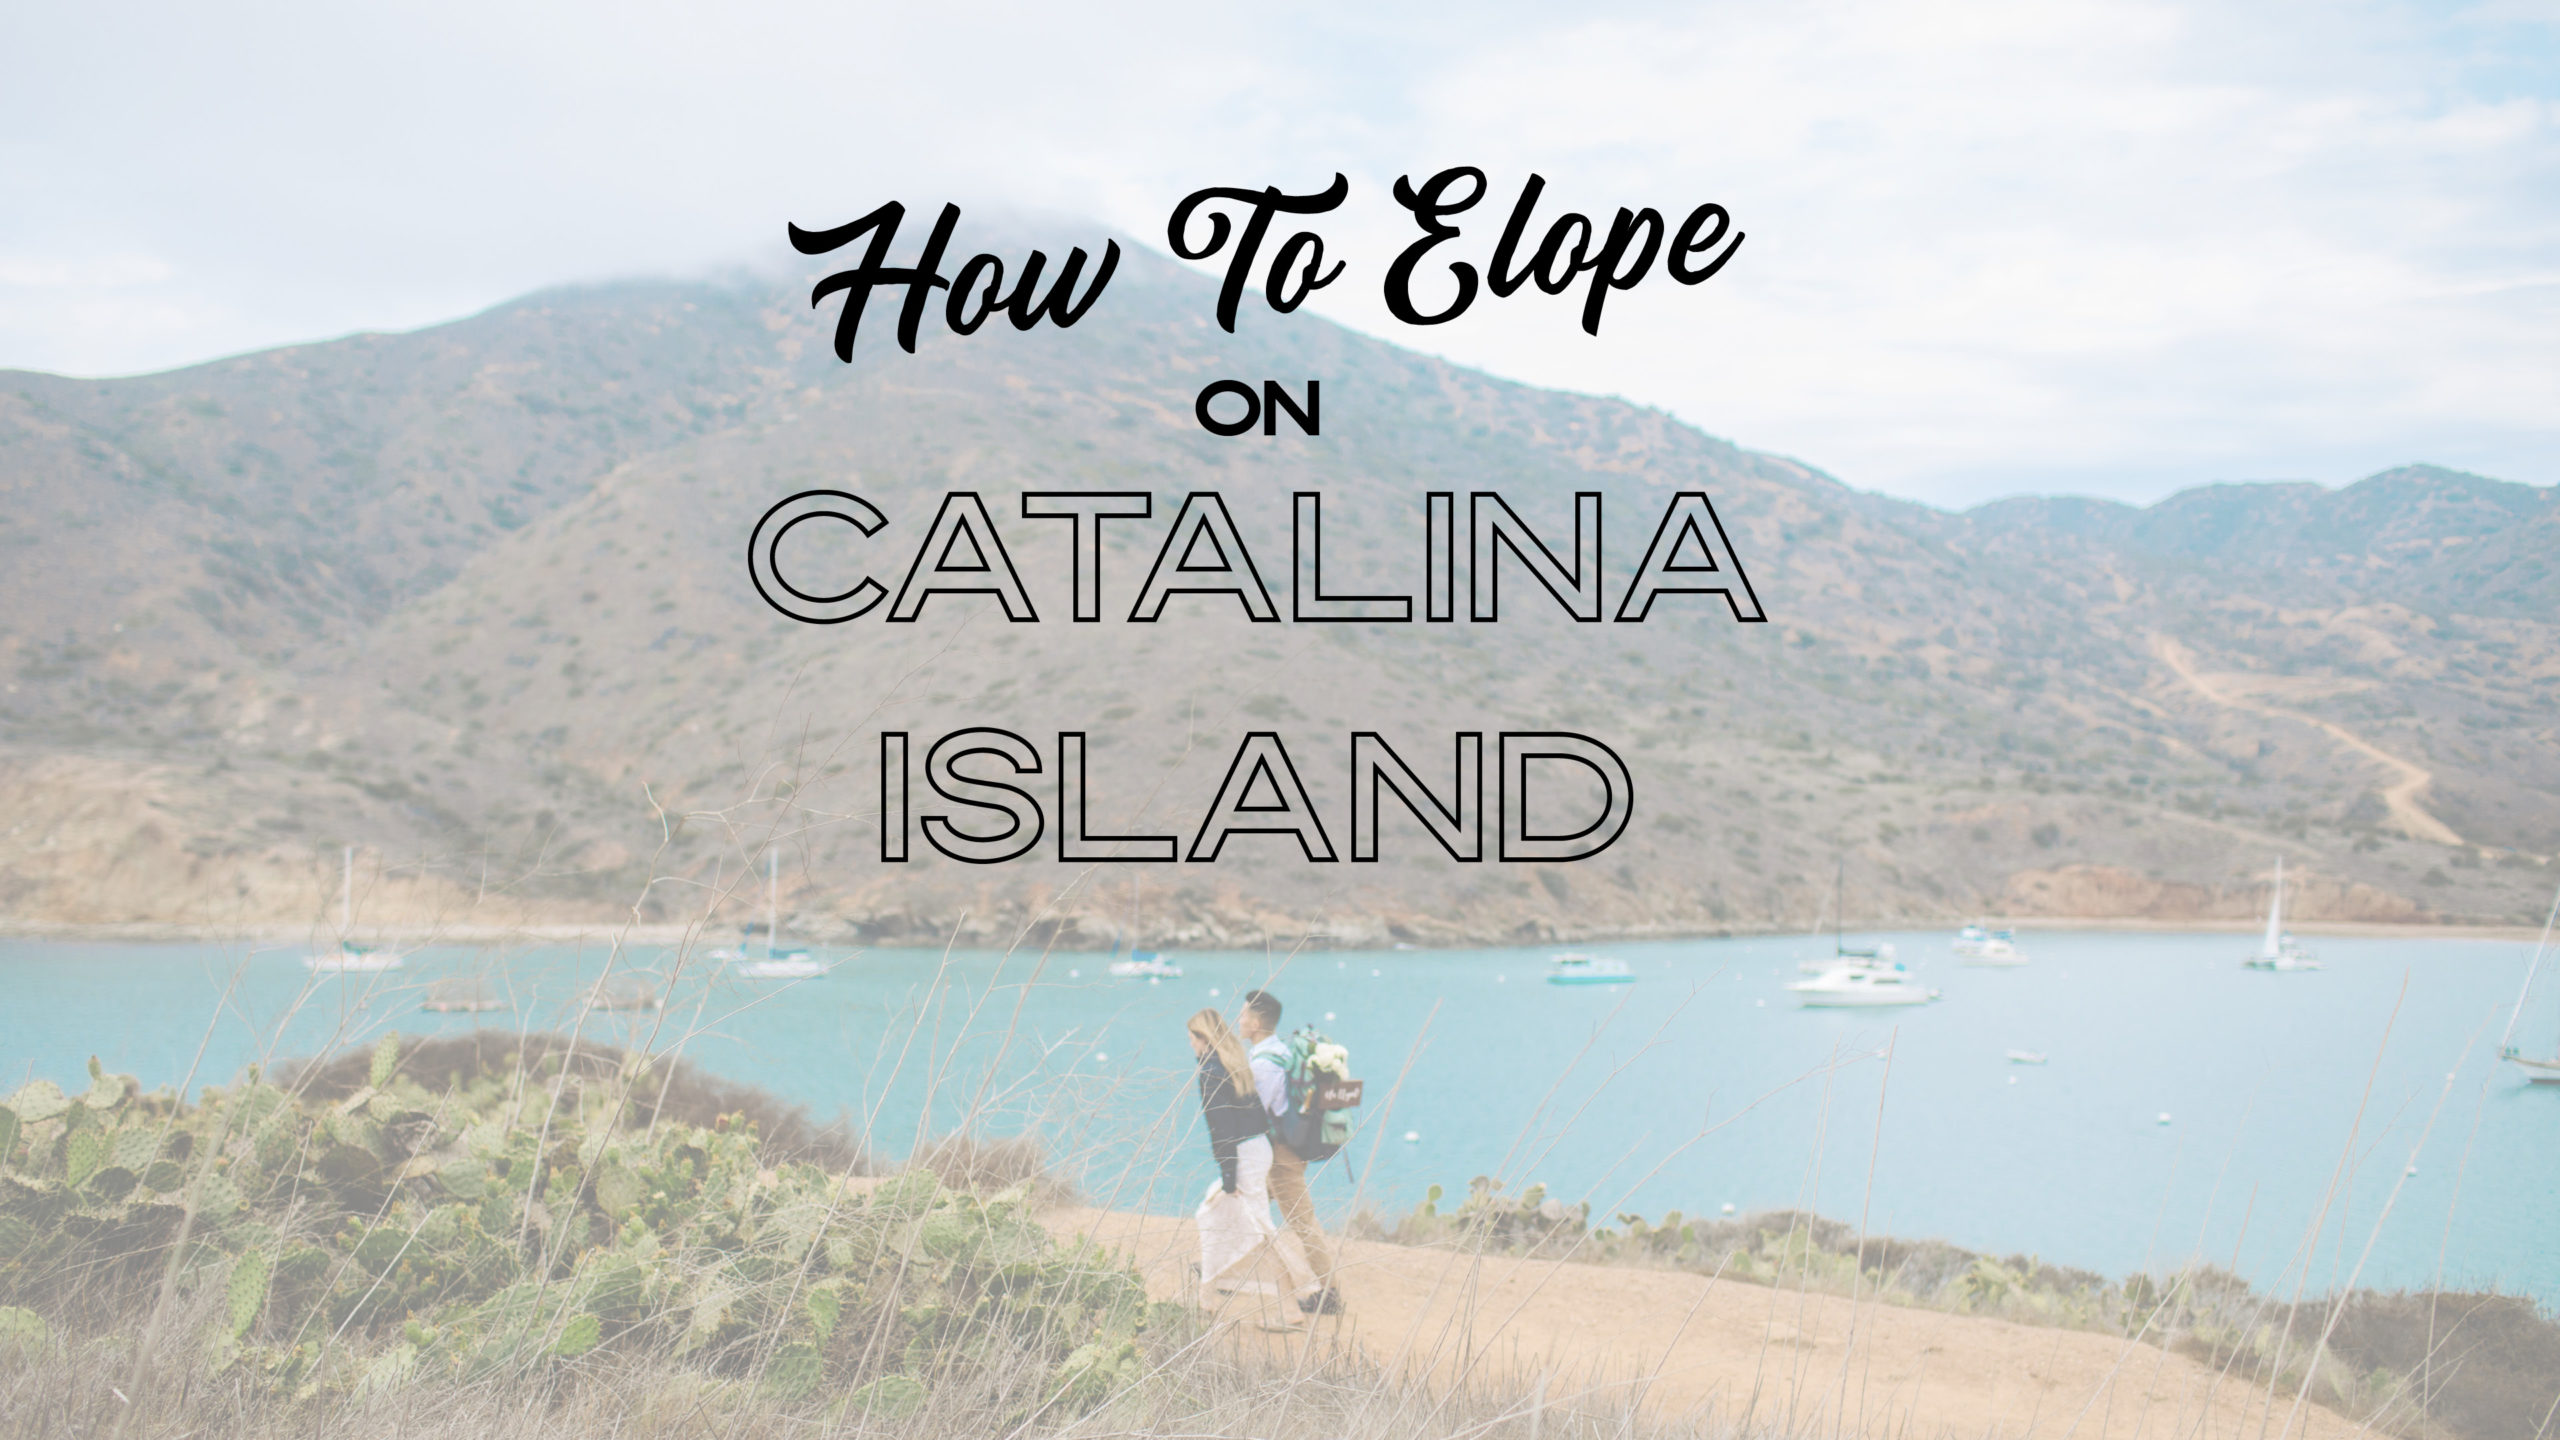 How-to-Elope-On-Catalina-Island-scaled Catalina Island Elopement | Your 2022 Guide